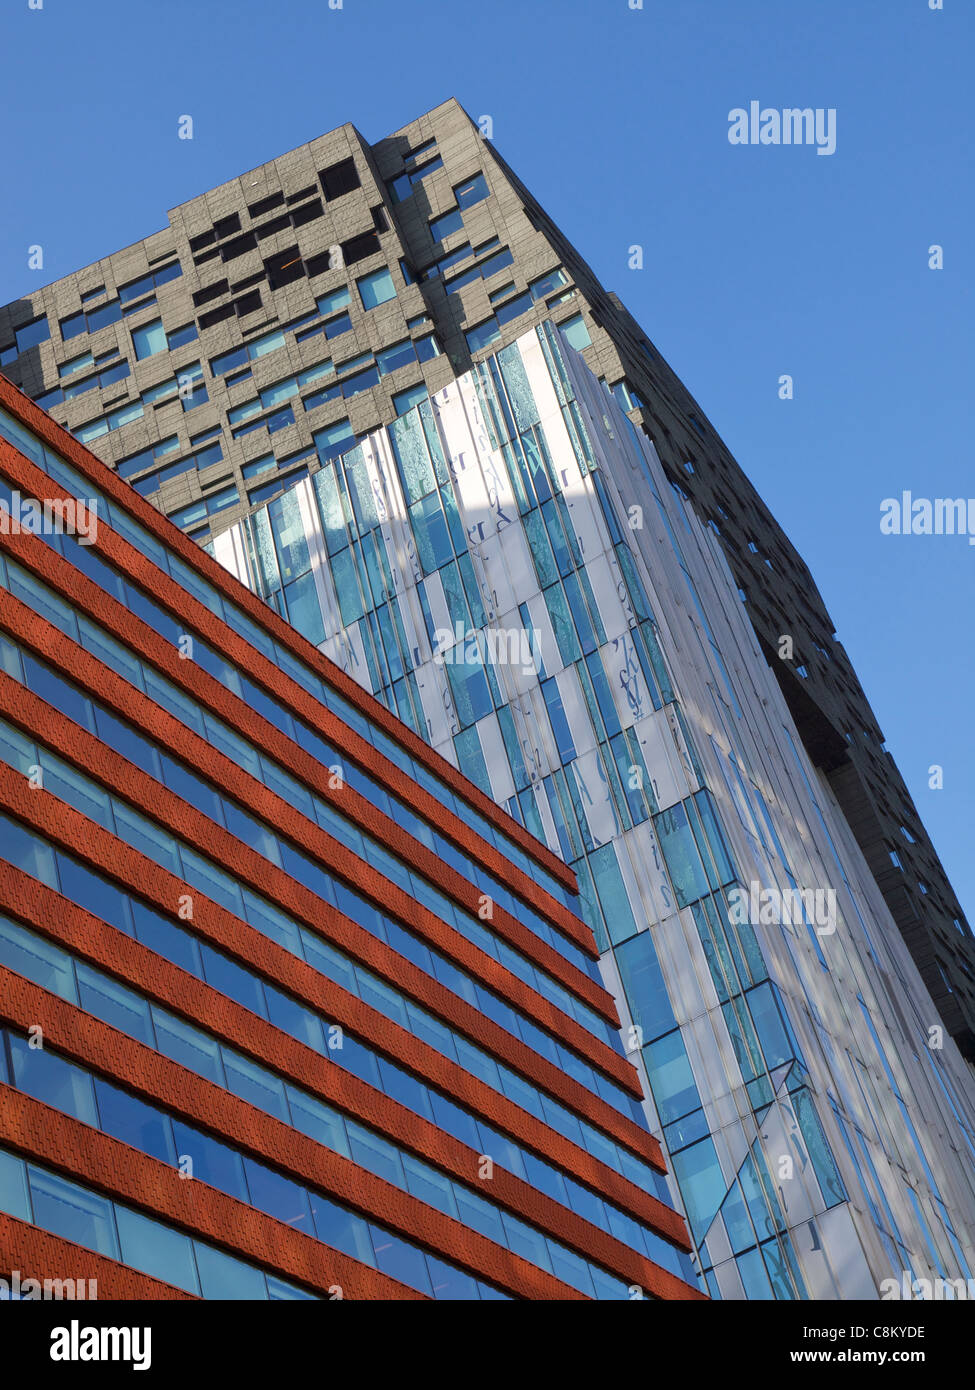 Contemporary architecture on the Zuidas financial district of Amsterdam, the Netherlands Stock Photo